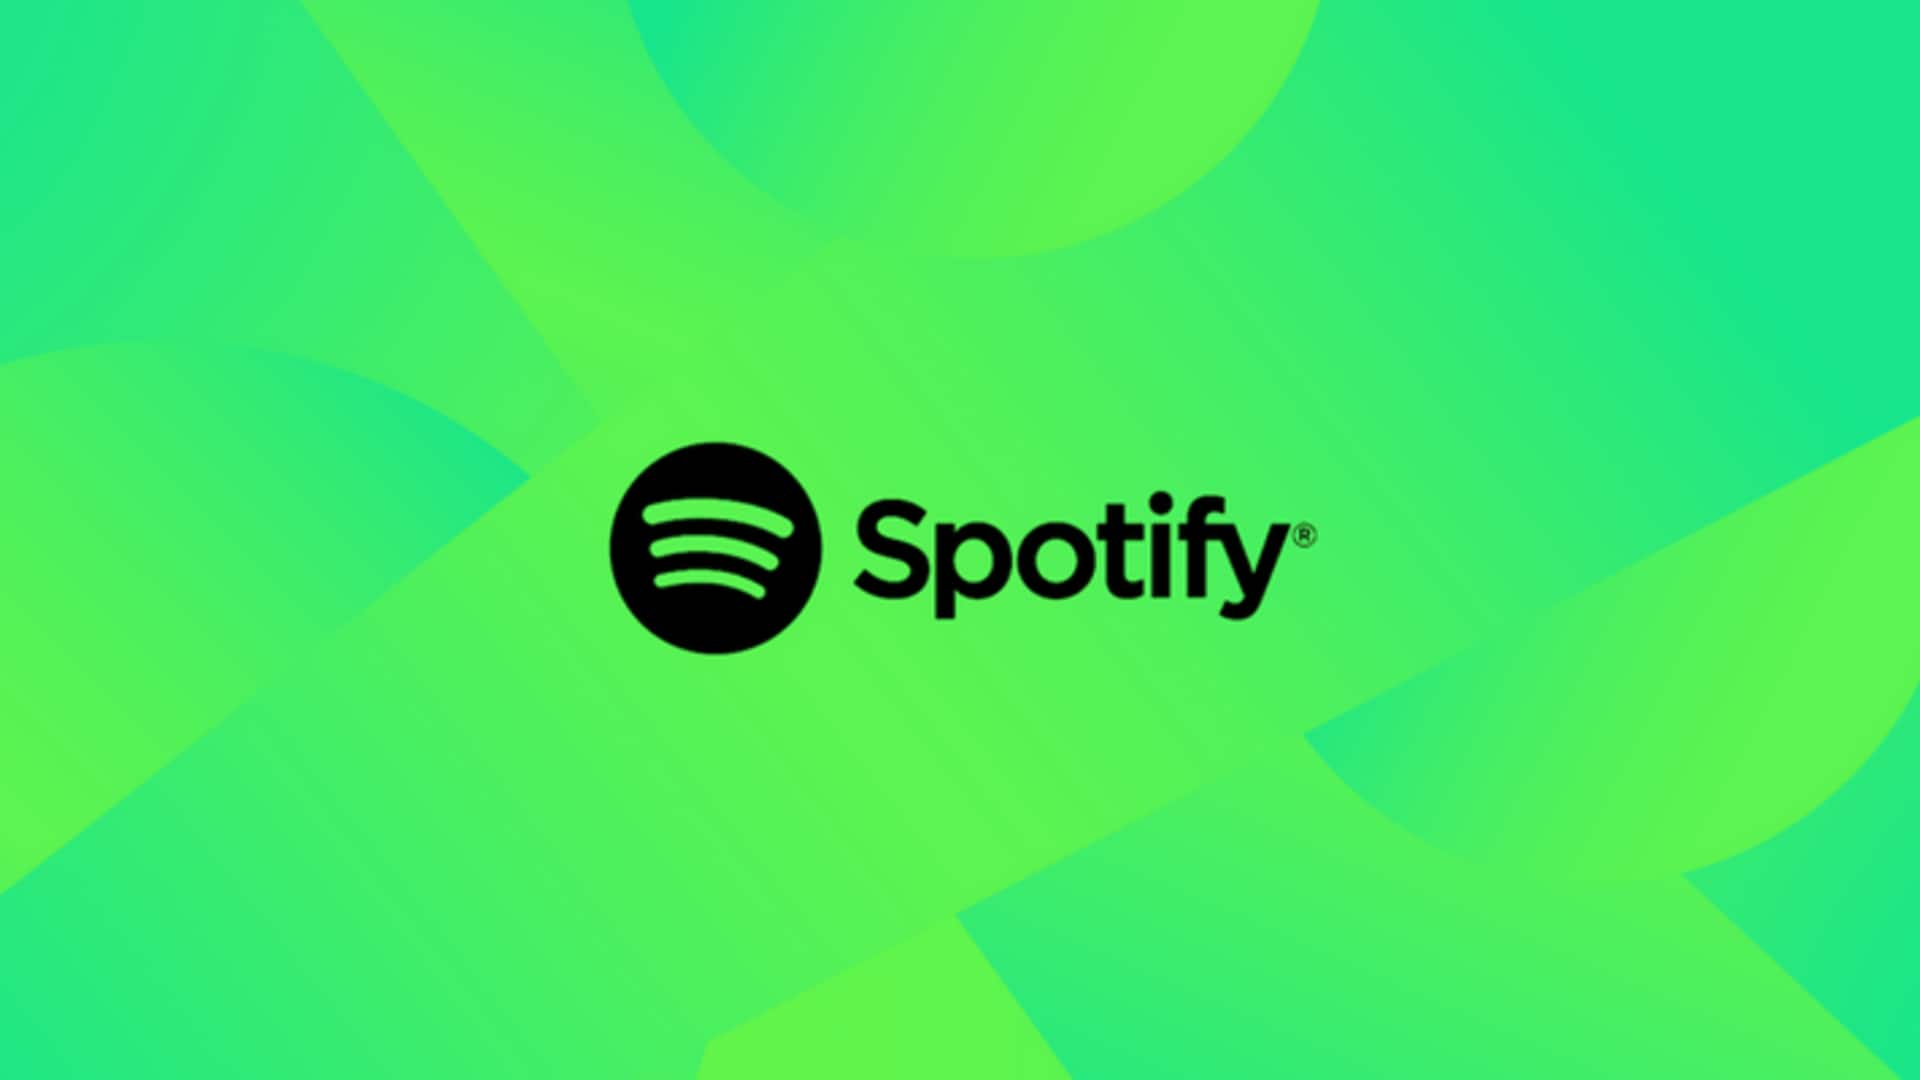 Spotify to use Google AI to improve podcast, audiobook recommendations